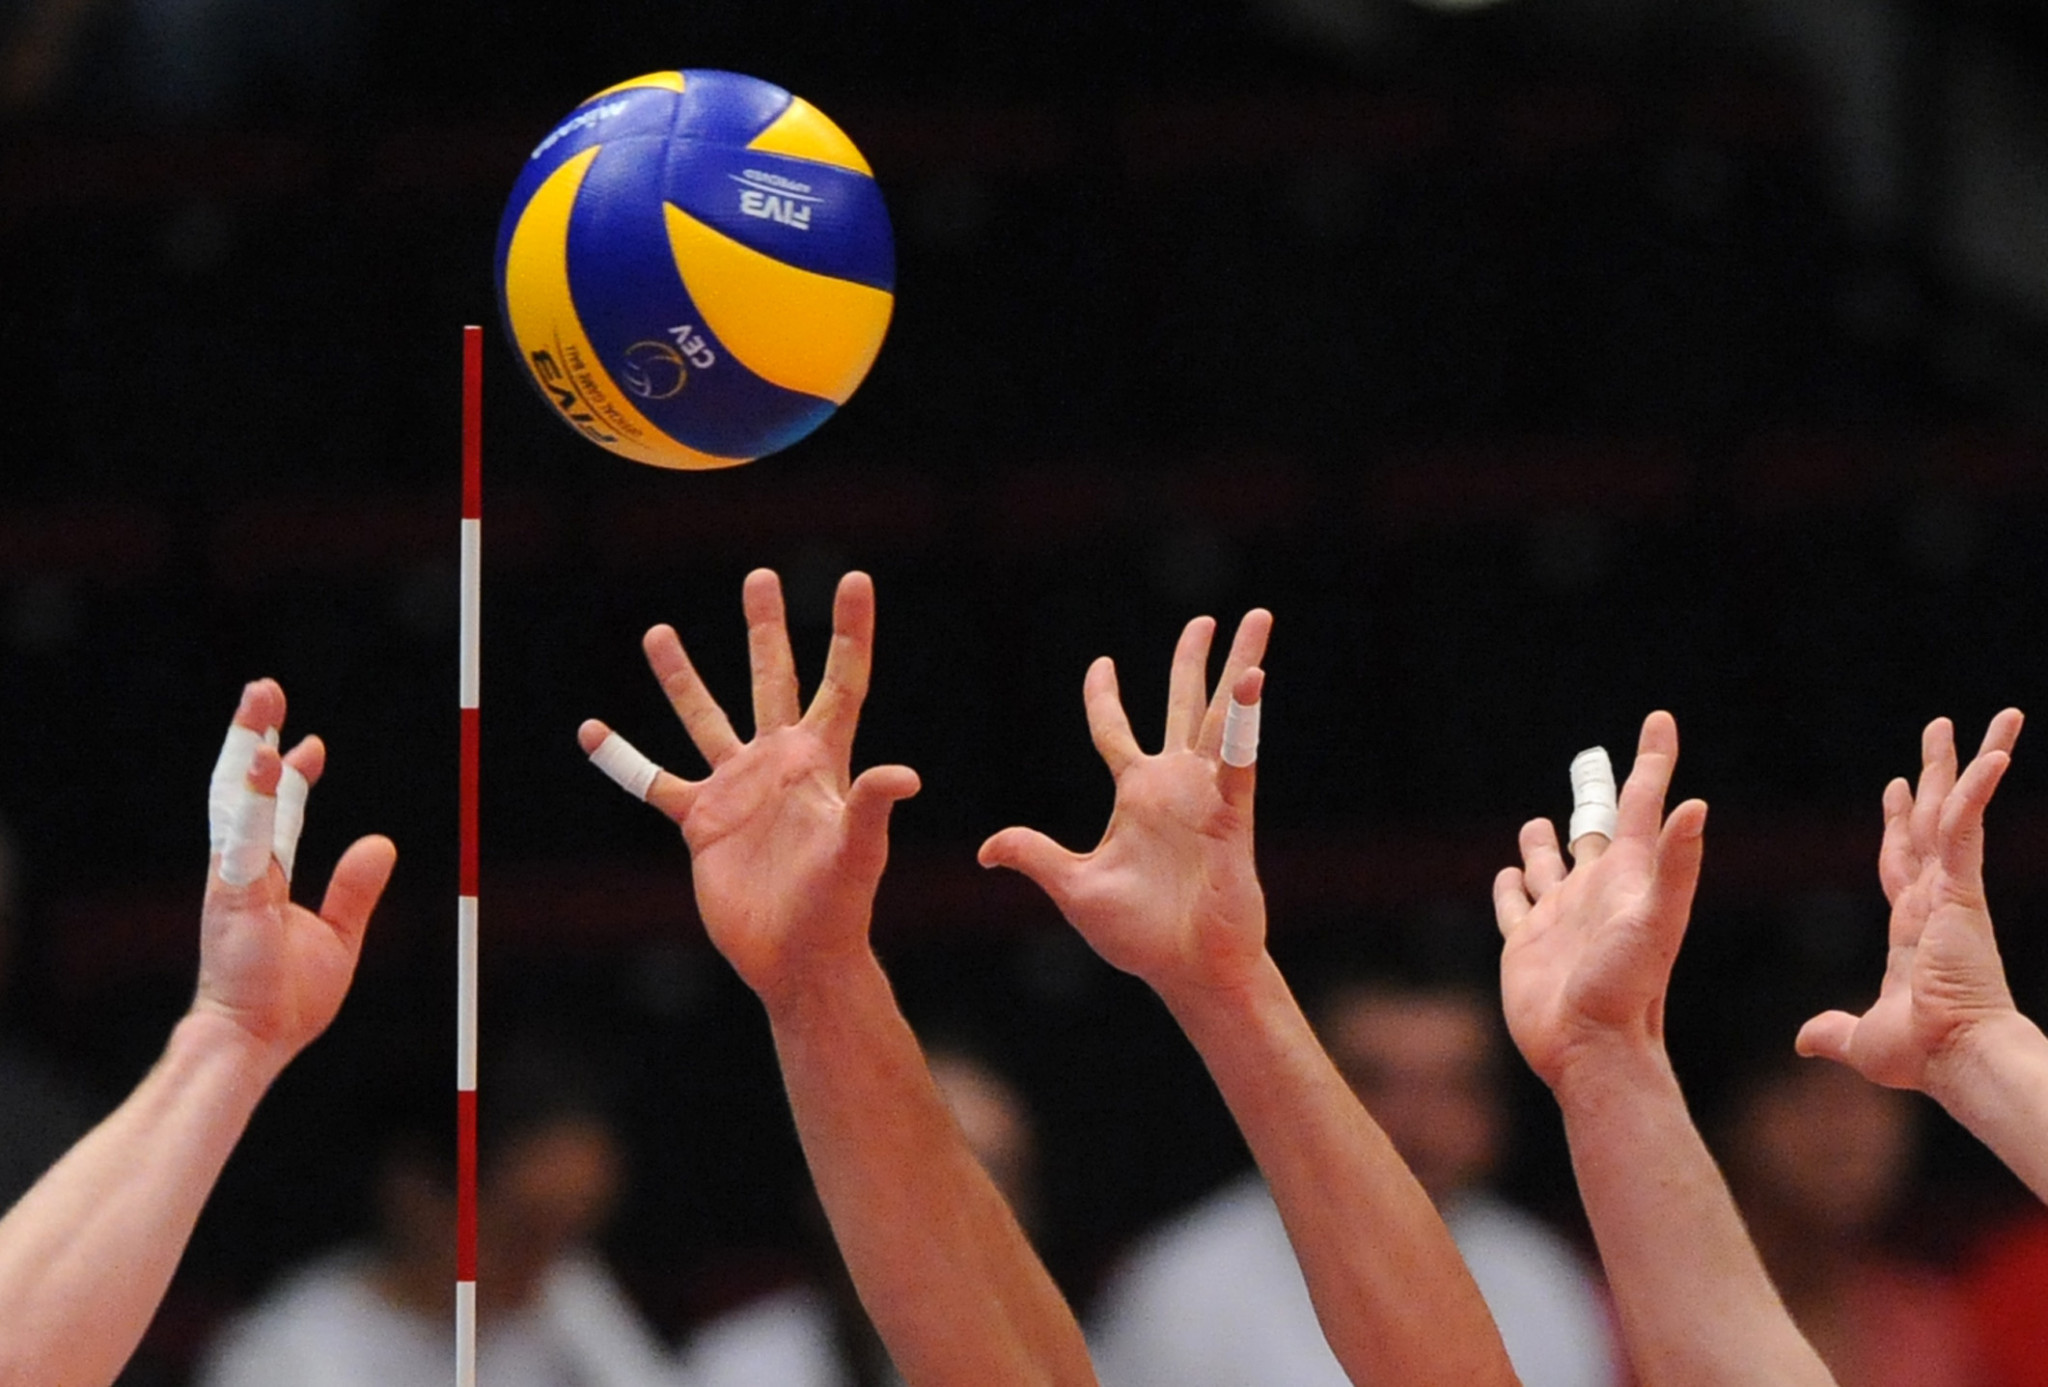 FIVB moves Volleyball Men’s World Championship from Russia over invasion of Ukraine